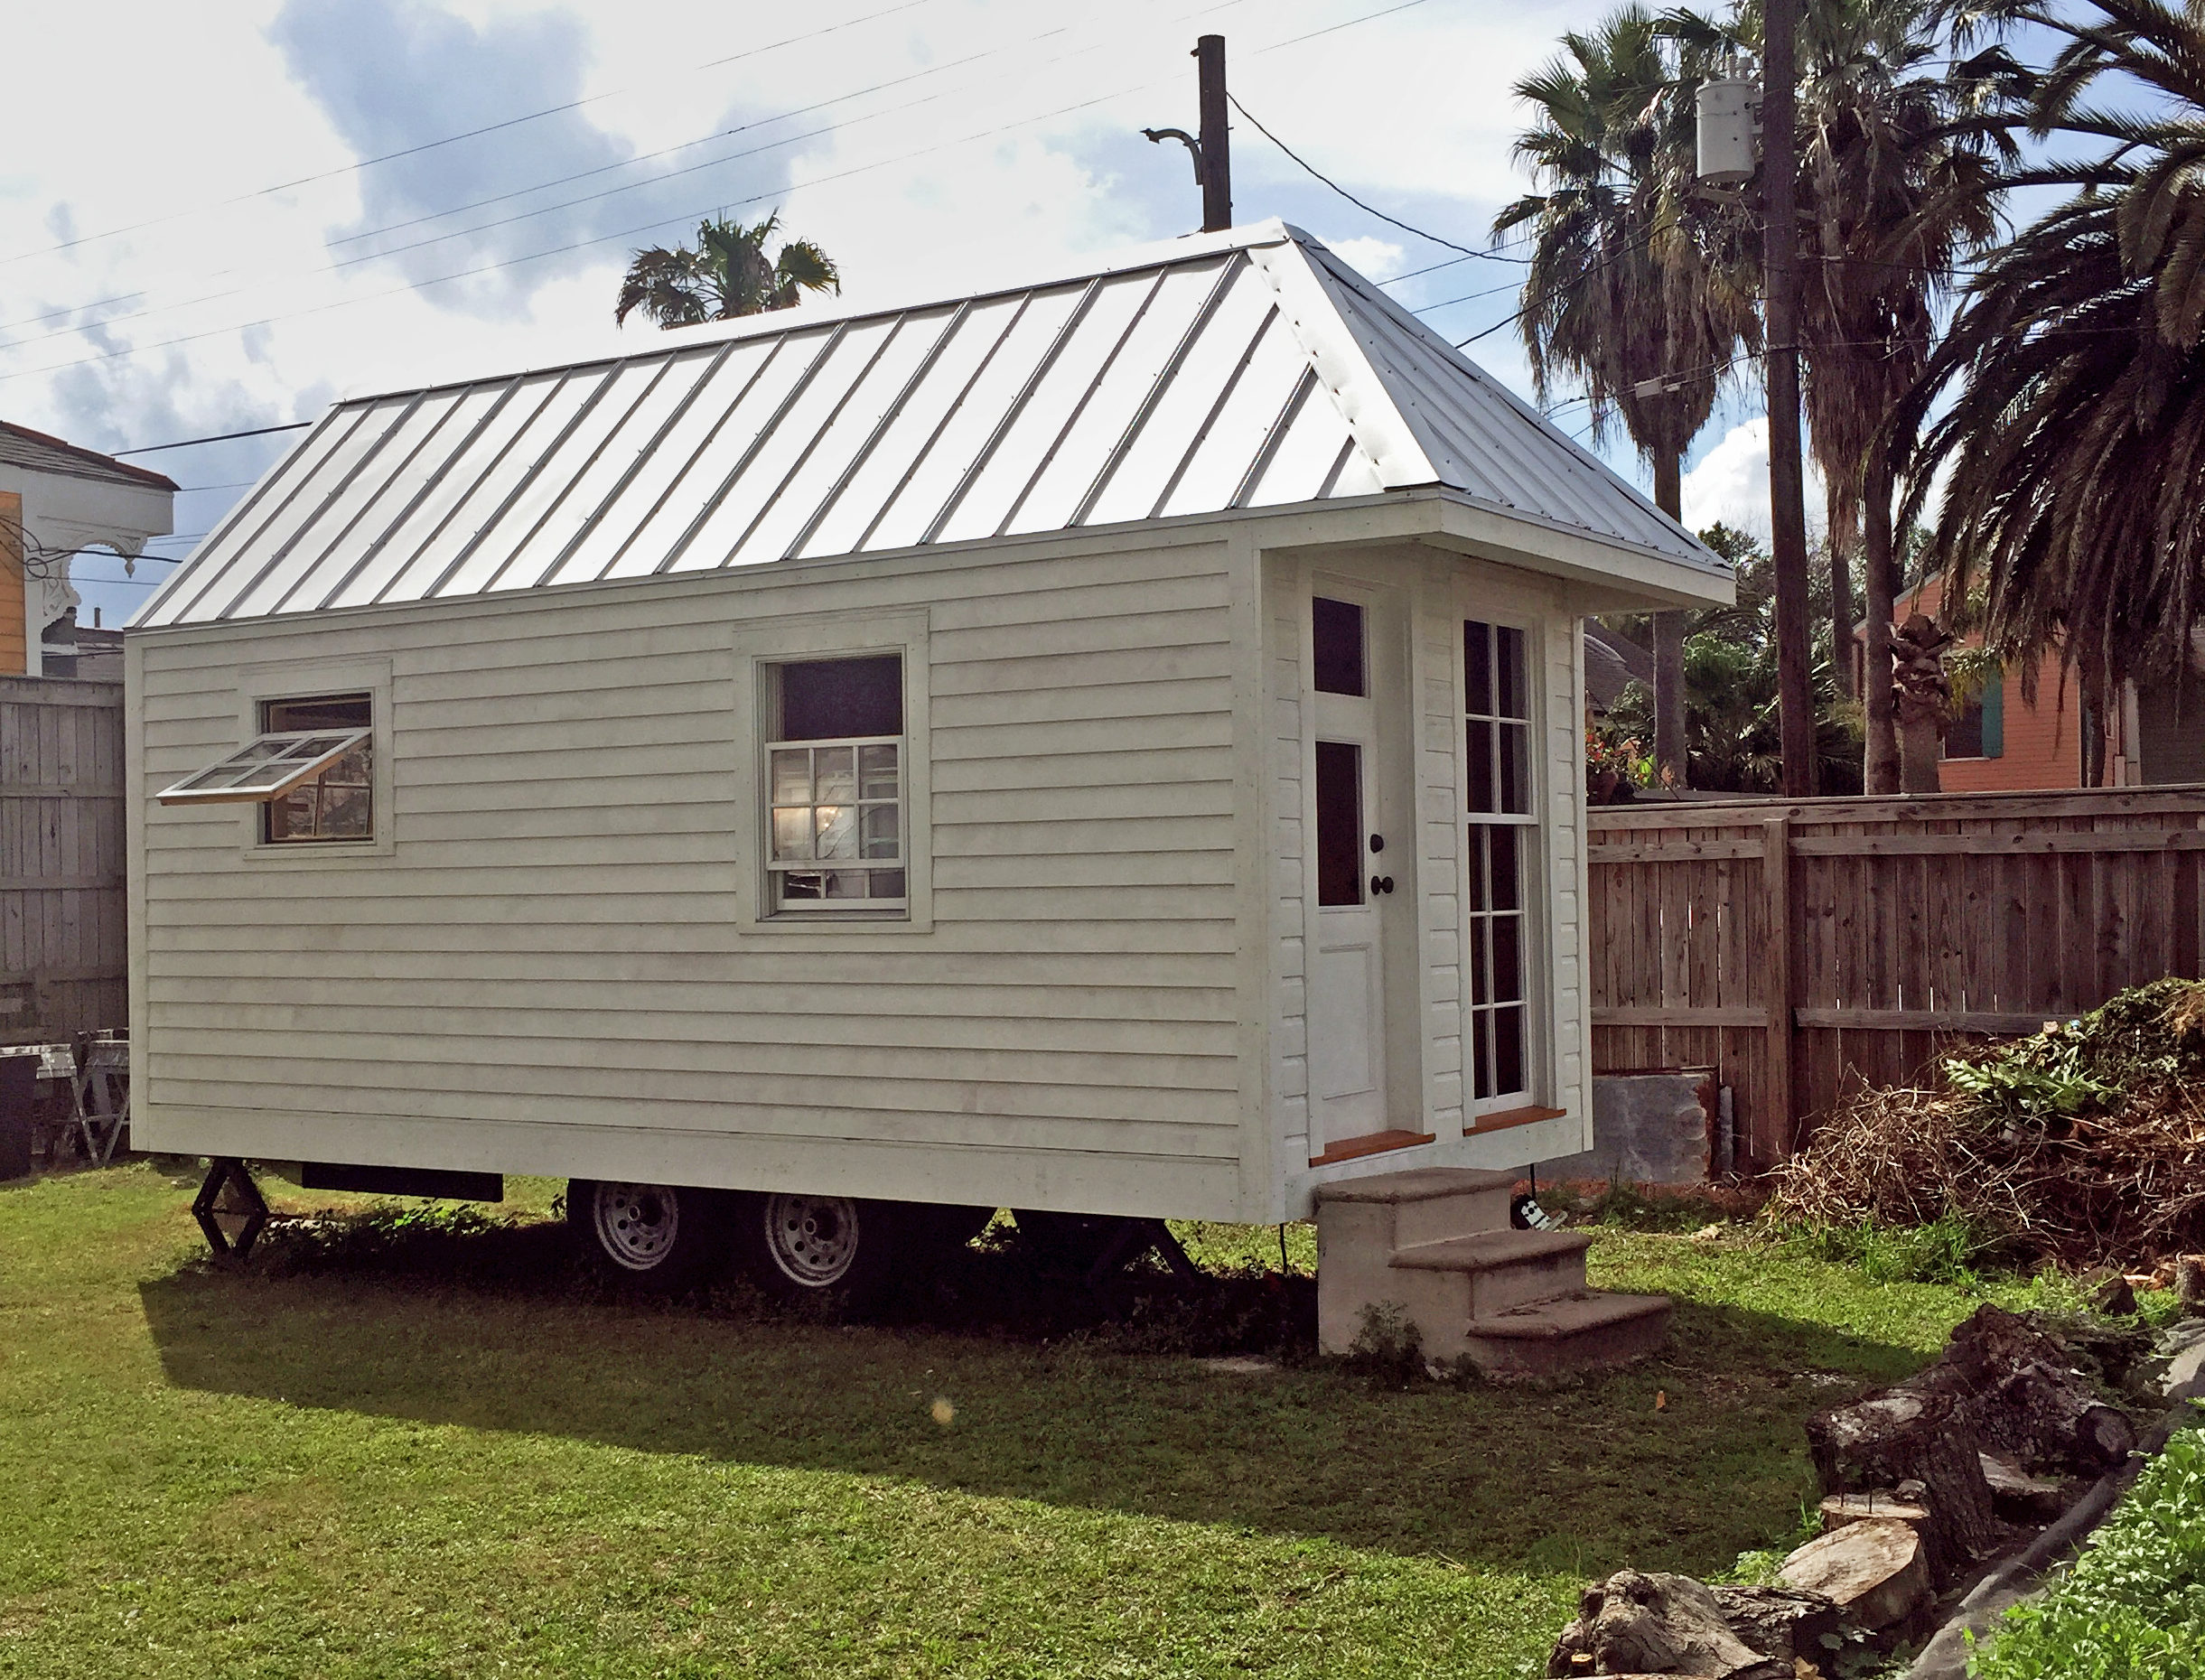 Tiny house trend comes to New Orleans: Could you live in 140 square feet?, Home/Garden